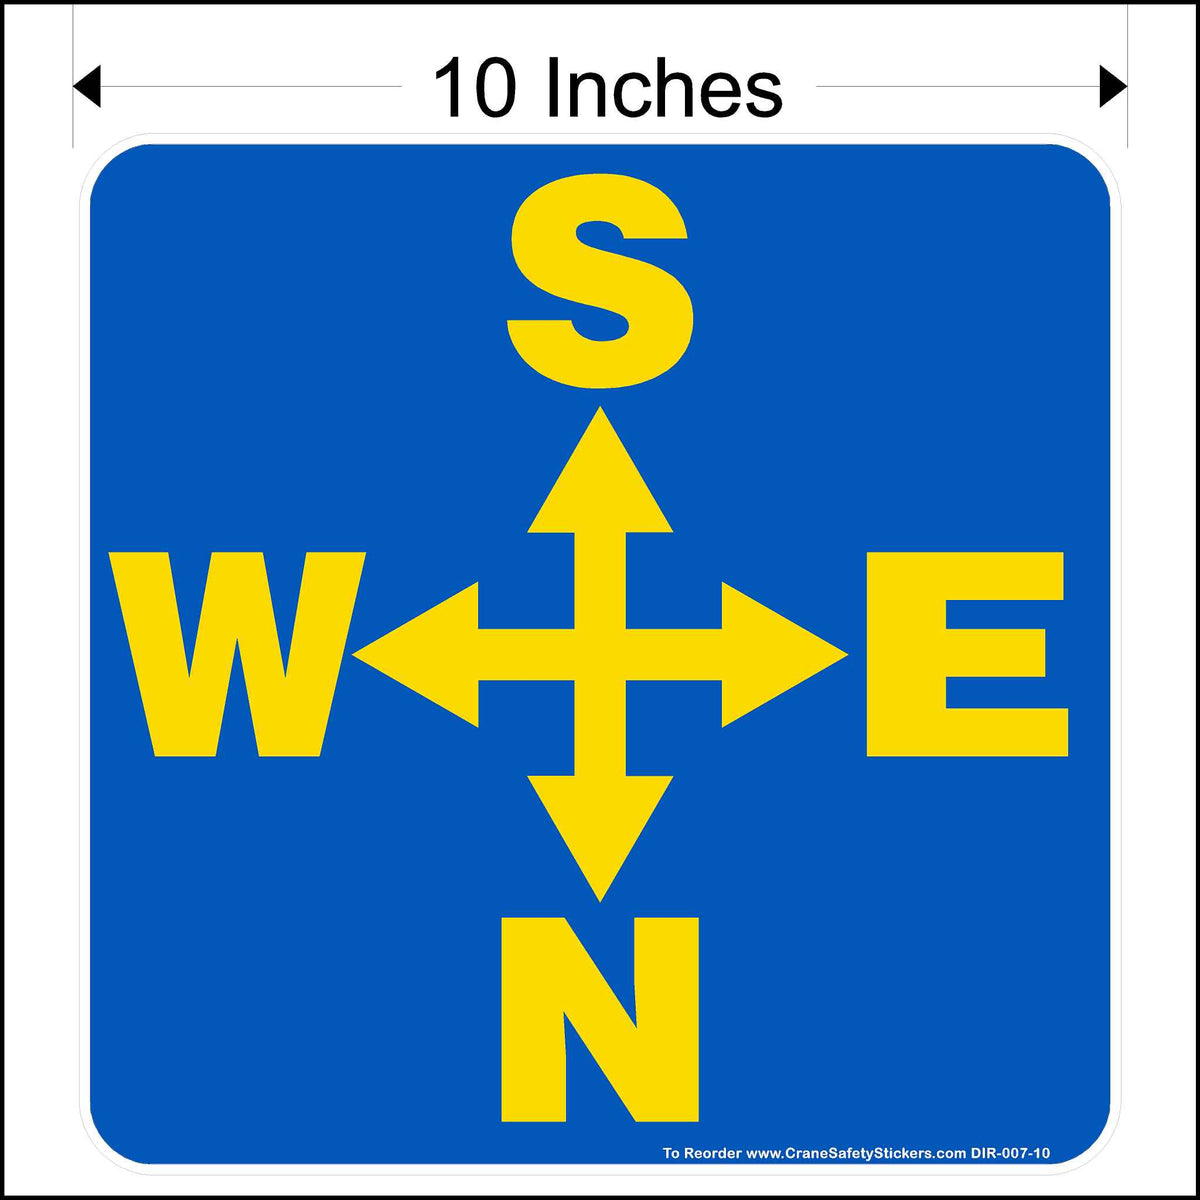 10 inch overhead crane decal printed with yellow south, notrth, east, and west arrows on a blue background.